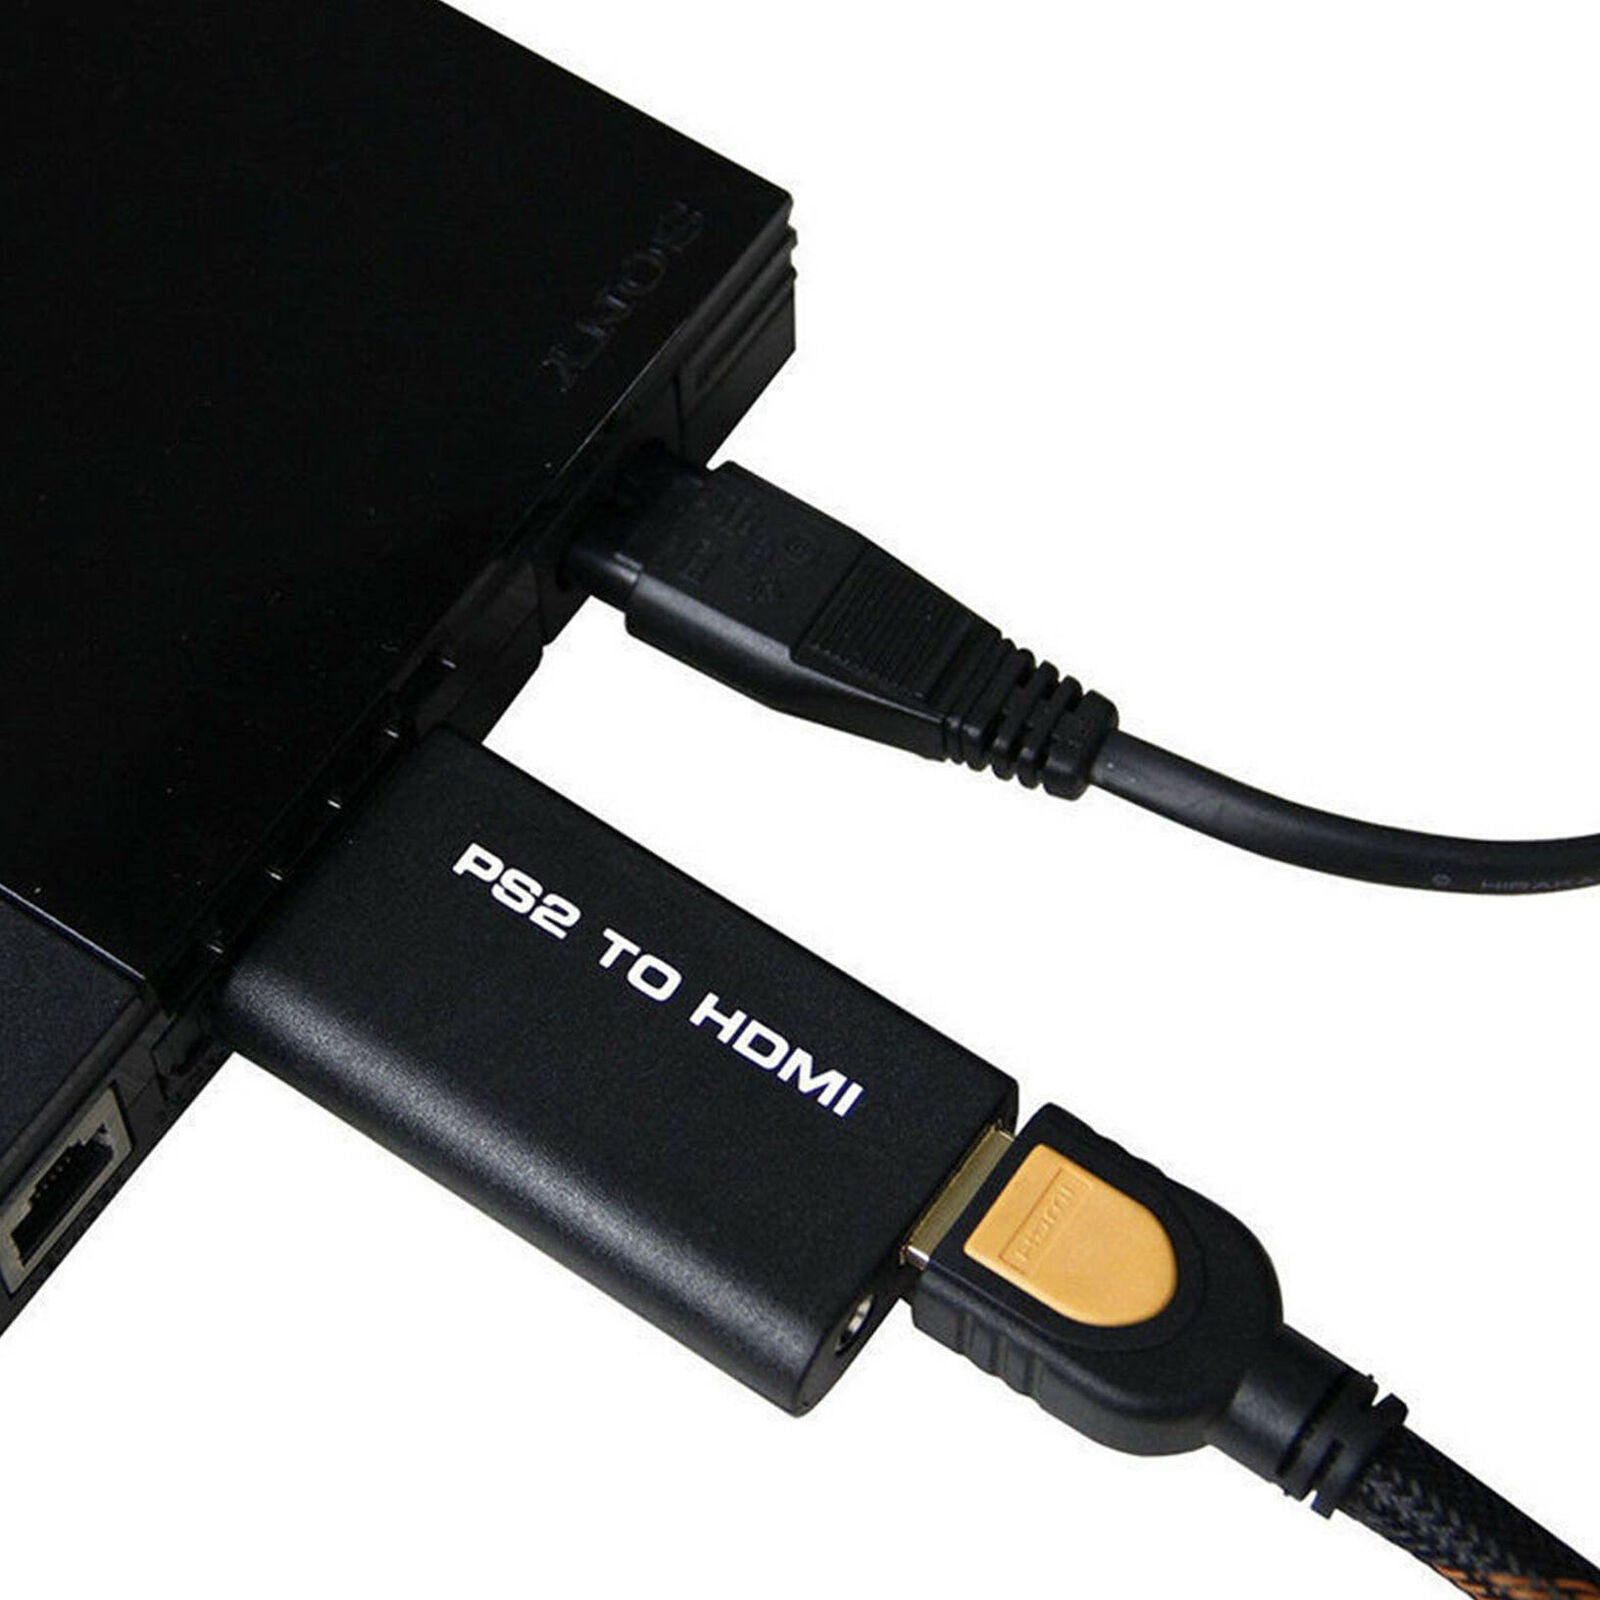 PS2 to HDMI Audio Video Cable AV Adapter Converter w/3.5mm Audio Output for HDTV